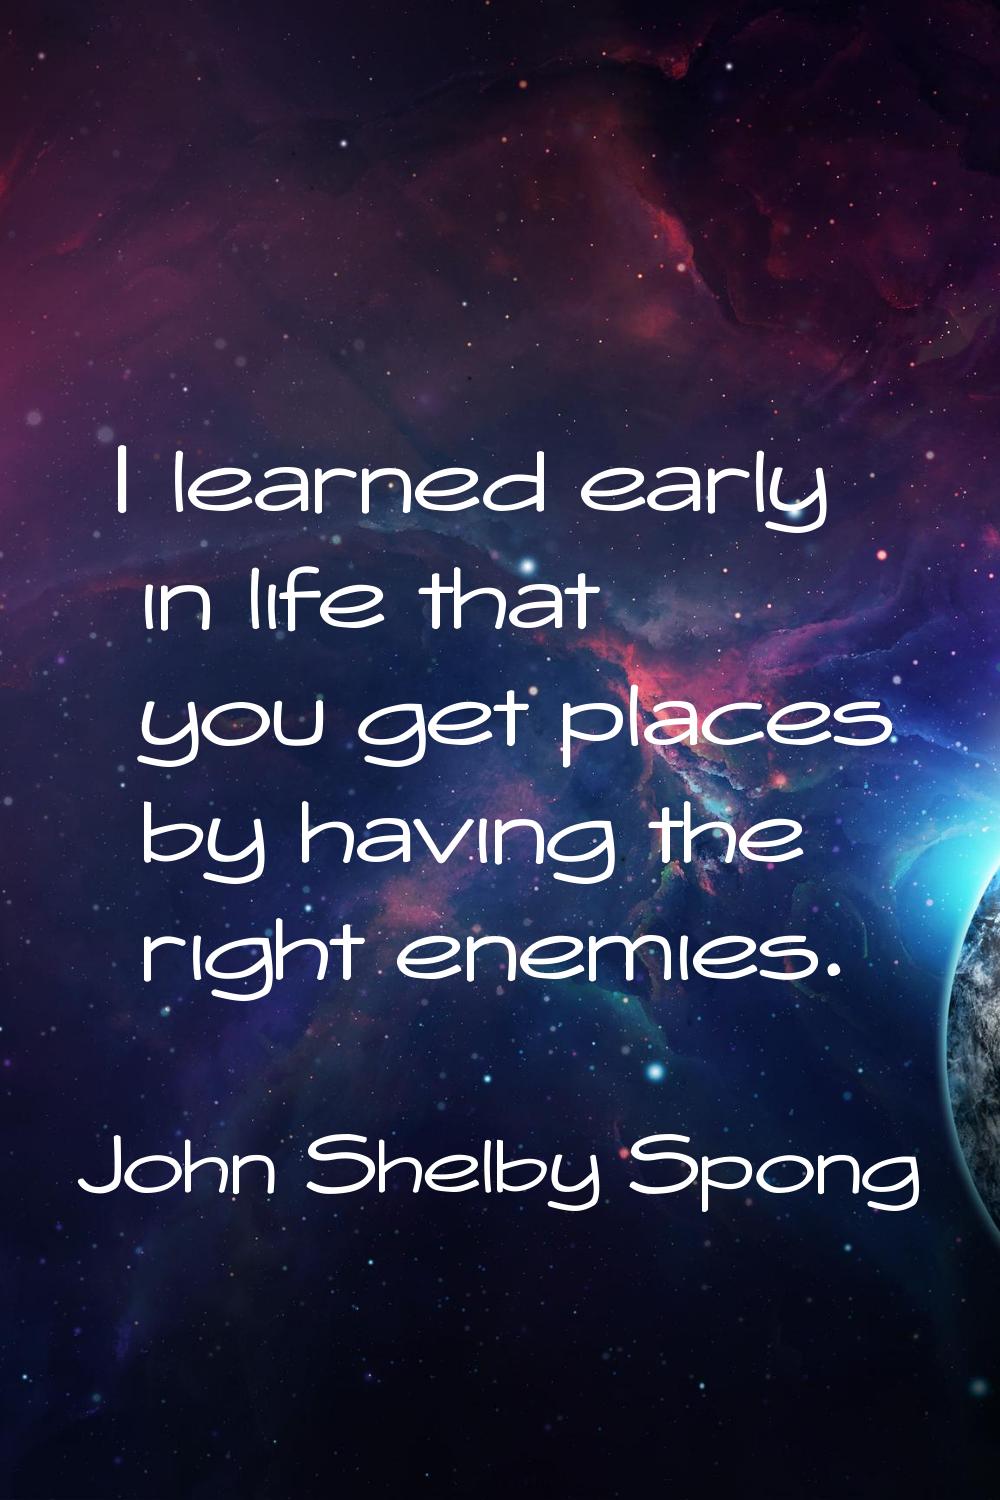 I learned early in life that you get places by having the right enemies.